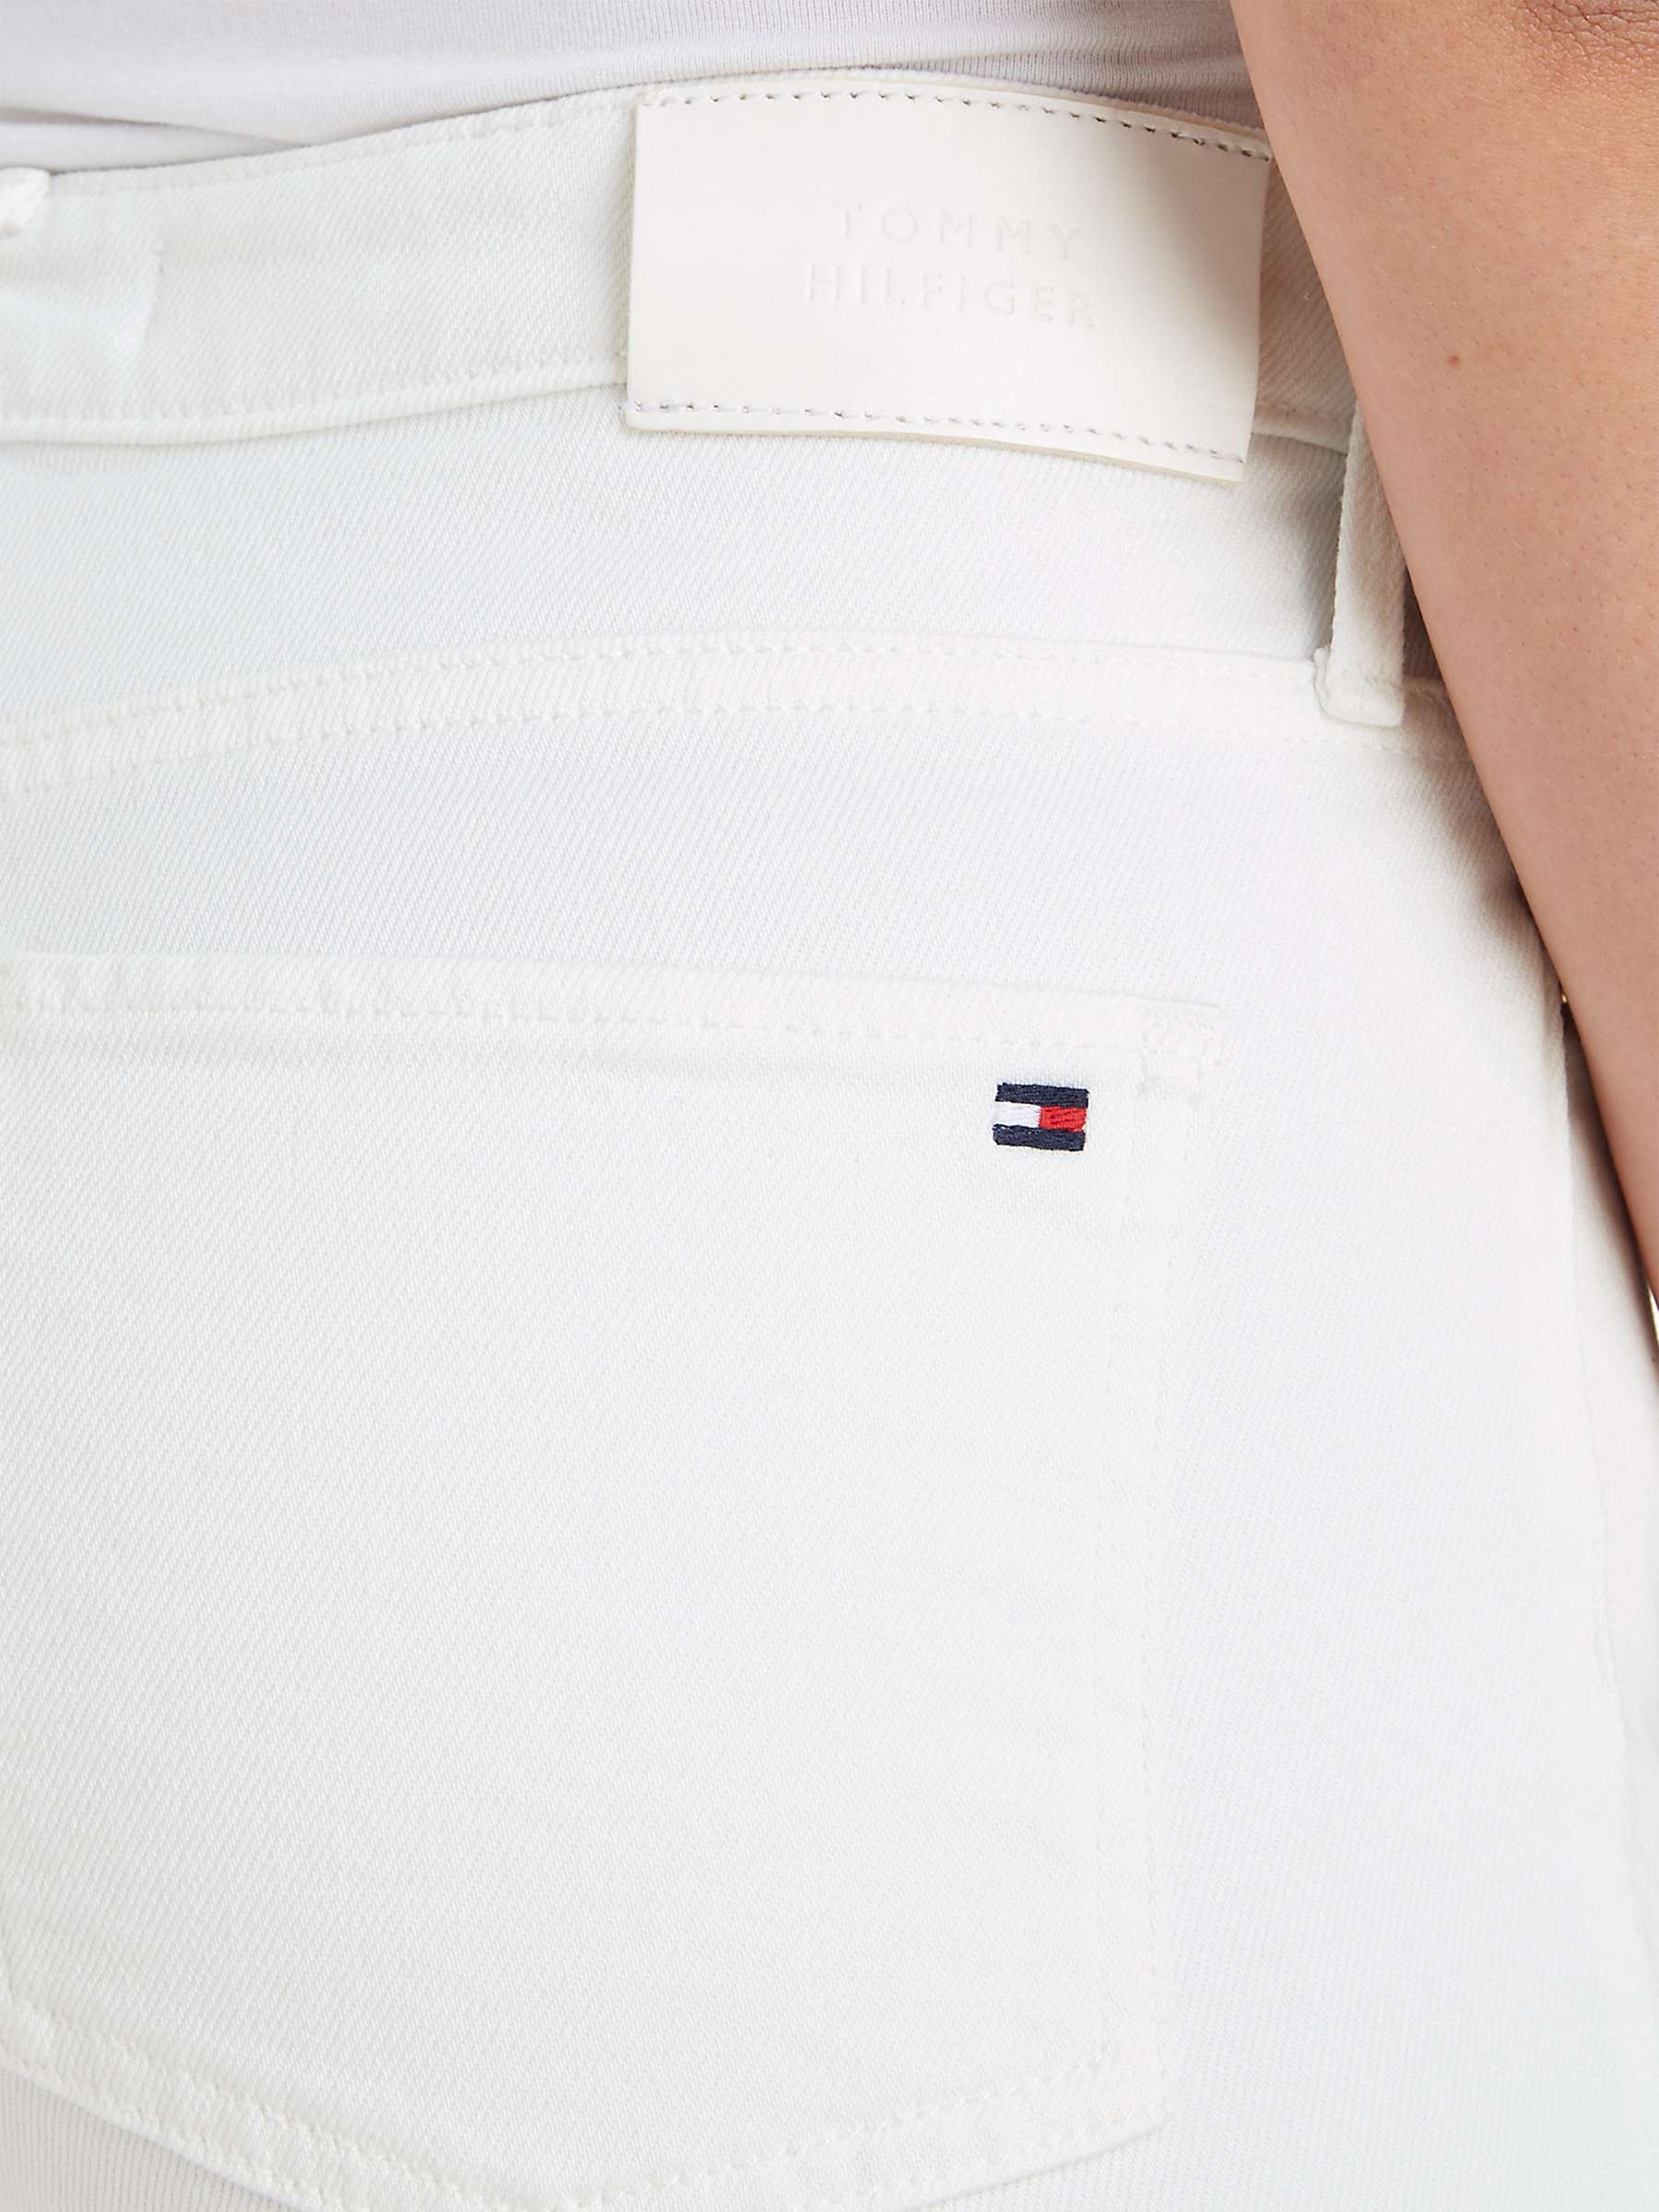 Buy Tommy Hilfiger Bootcut Jeans, White Online at johnlewis.com